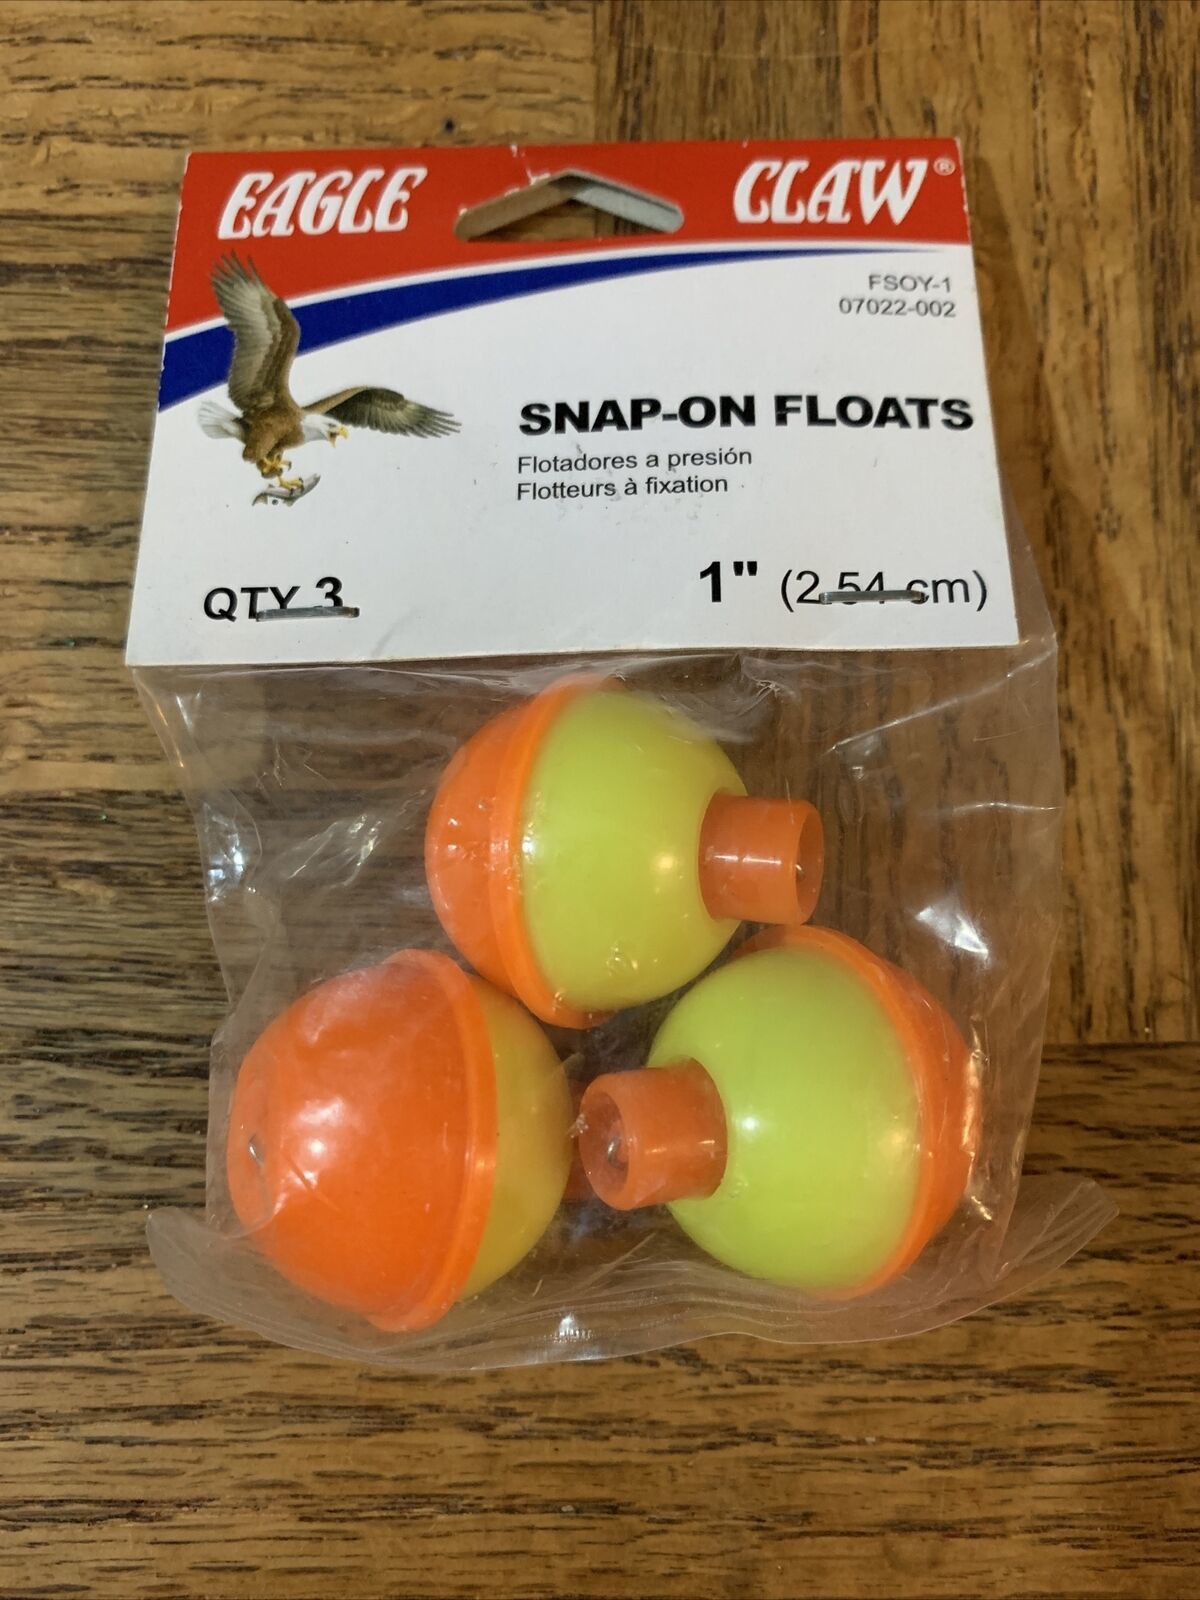 Eagle Claw Snap On Floats 1” - $8.79